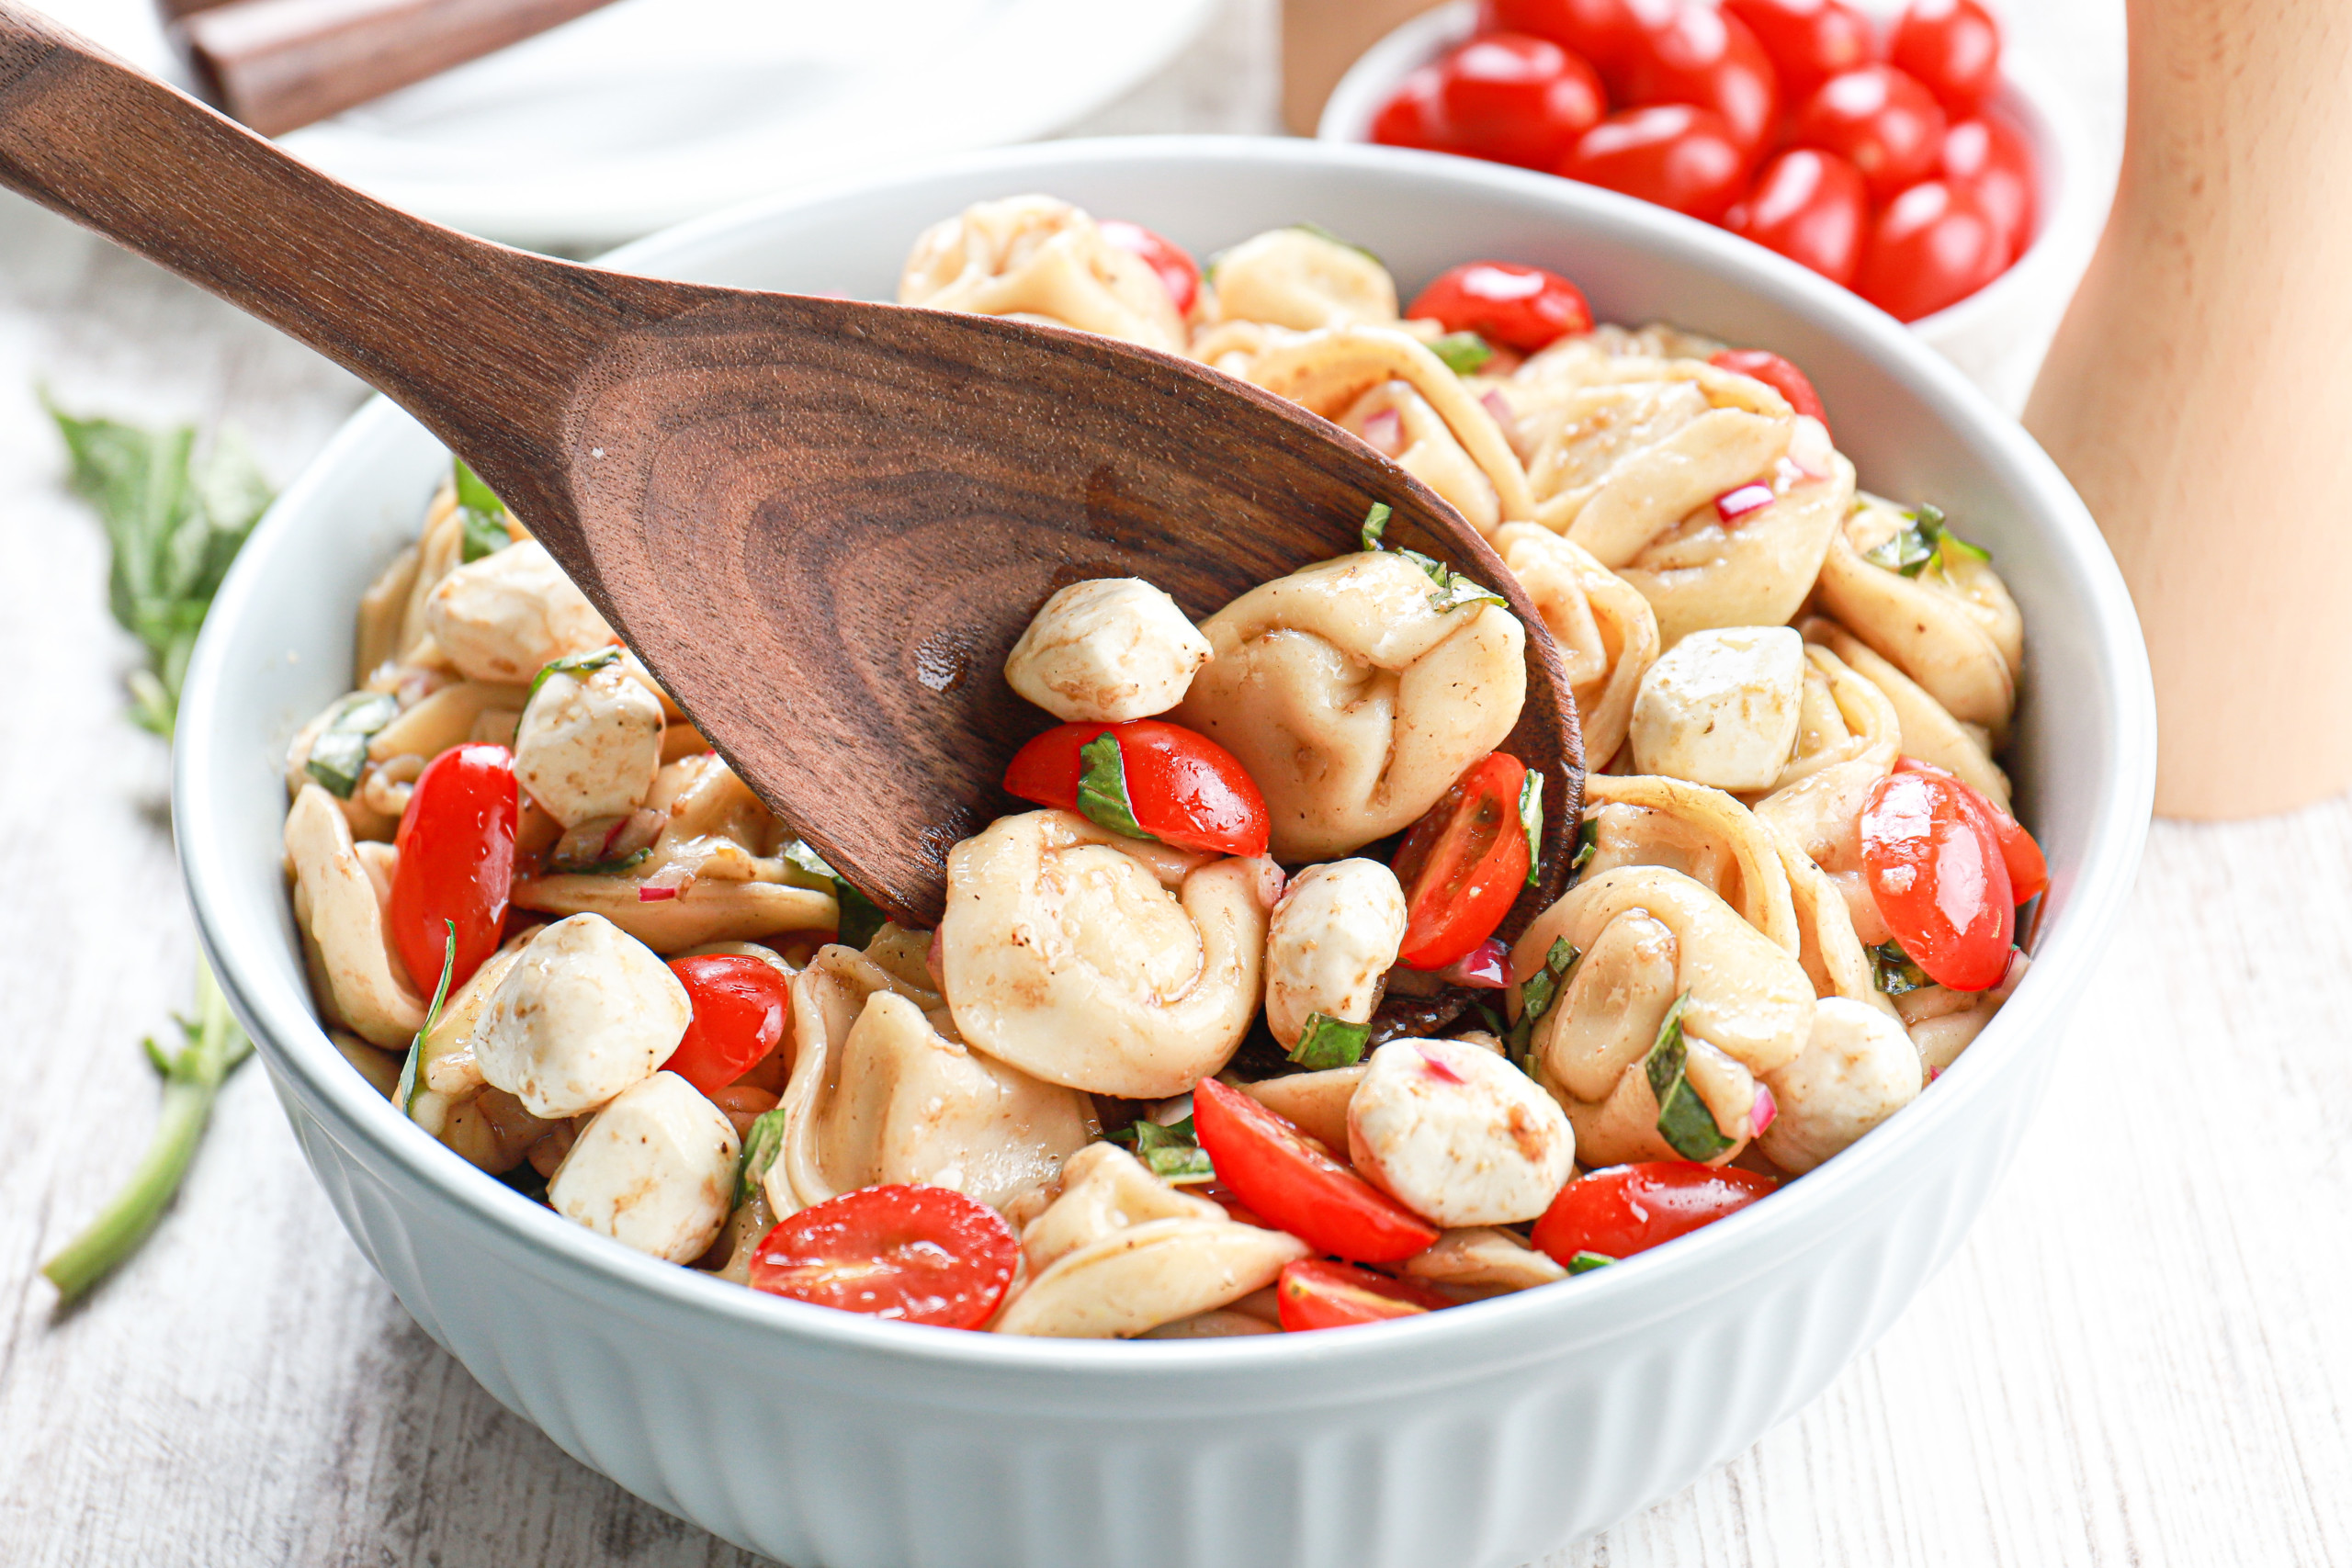 Up close view of a dark wooden spoon full of caprese tortellini salad.